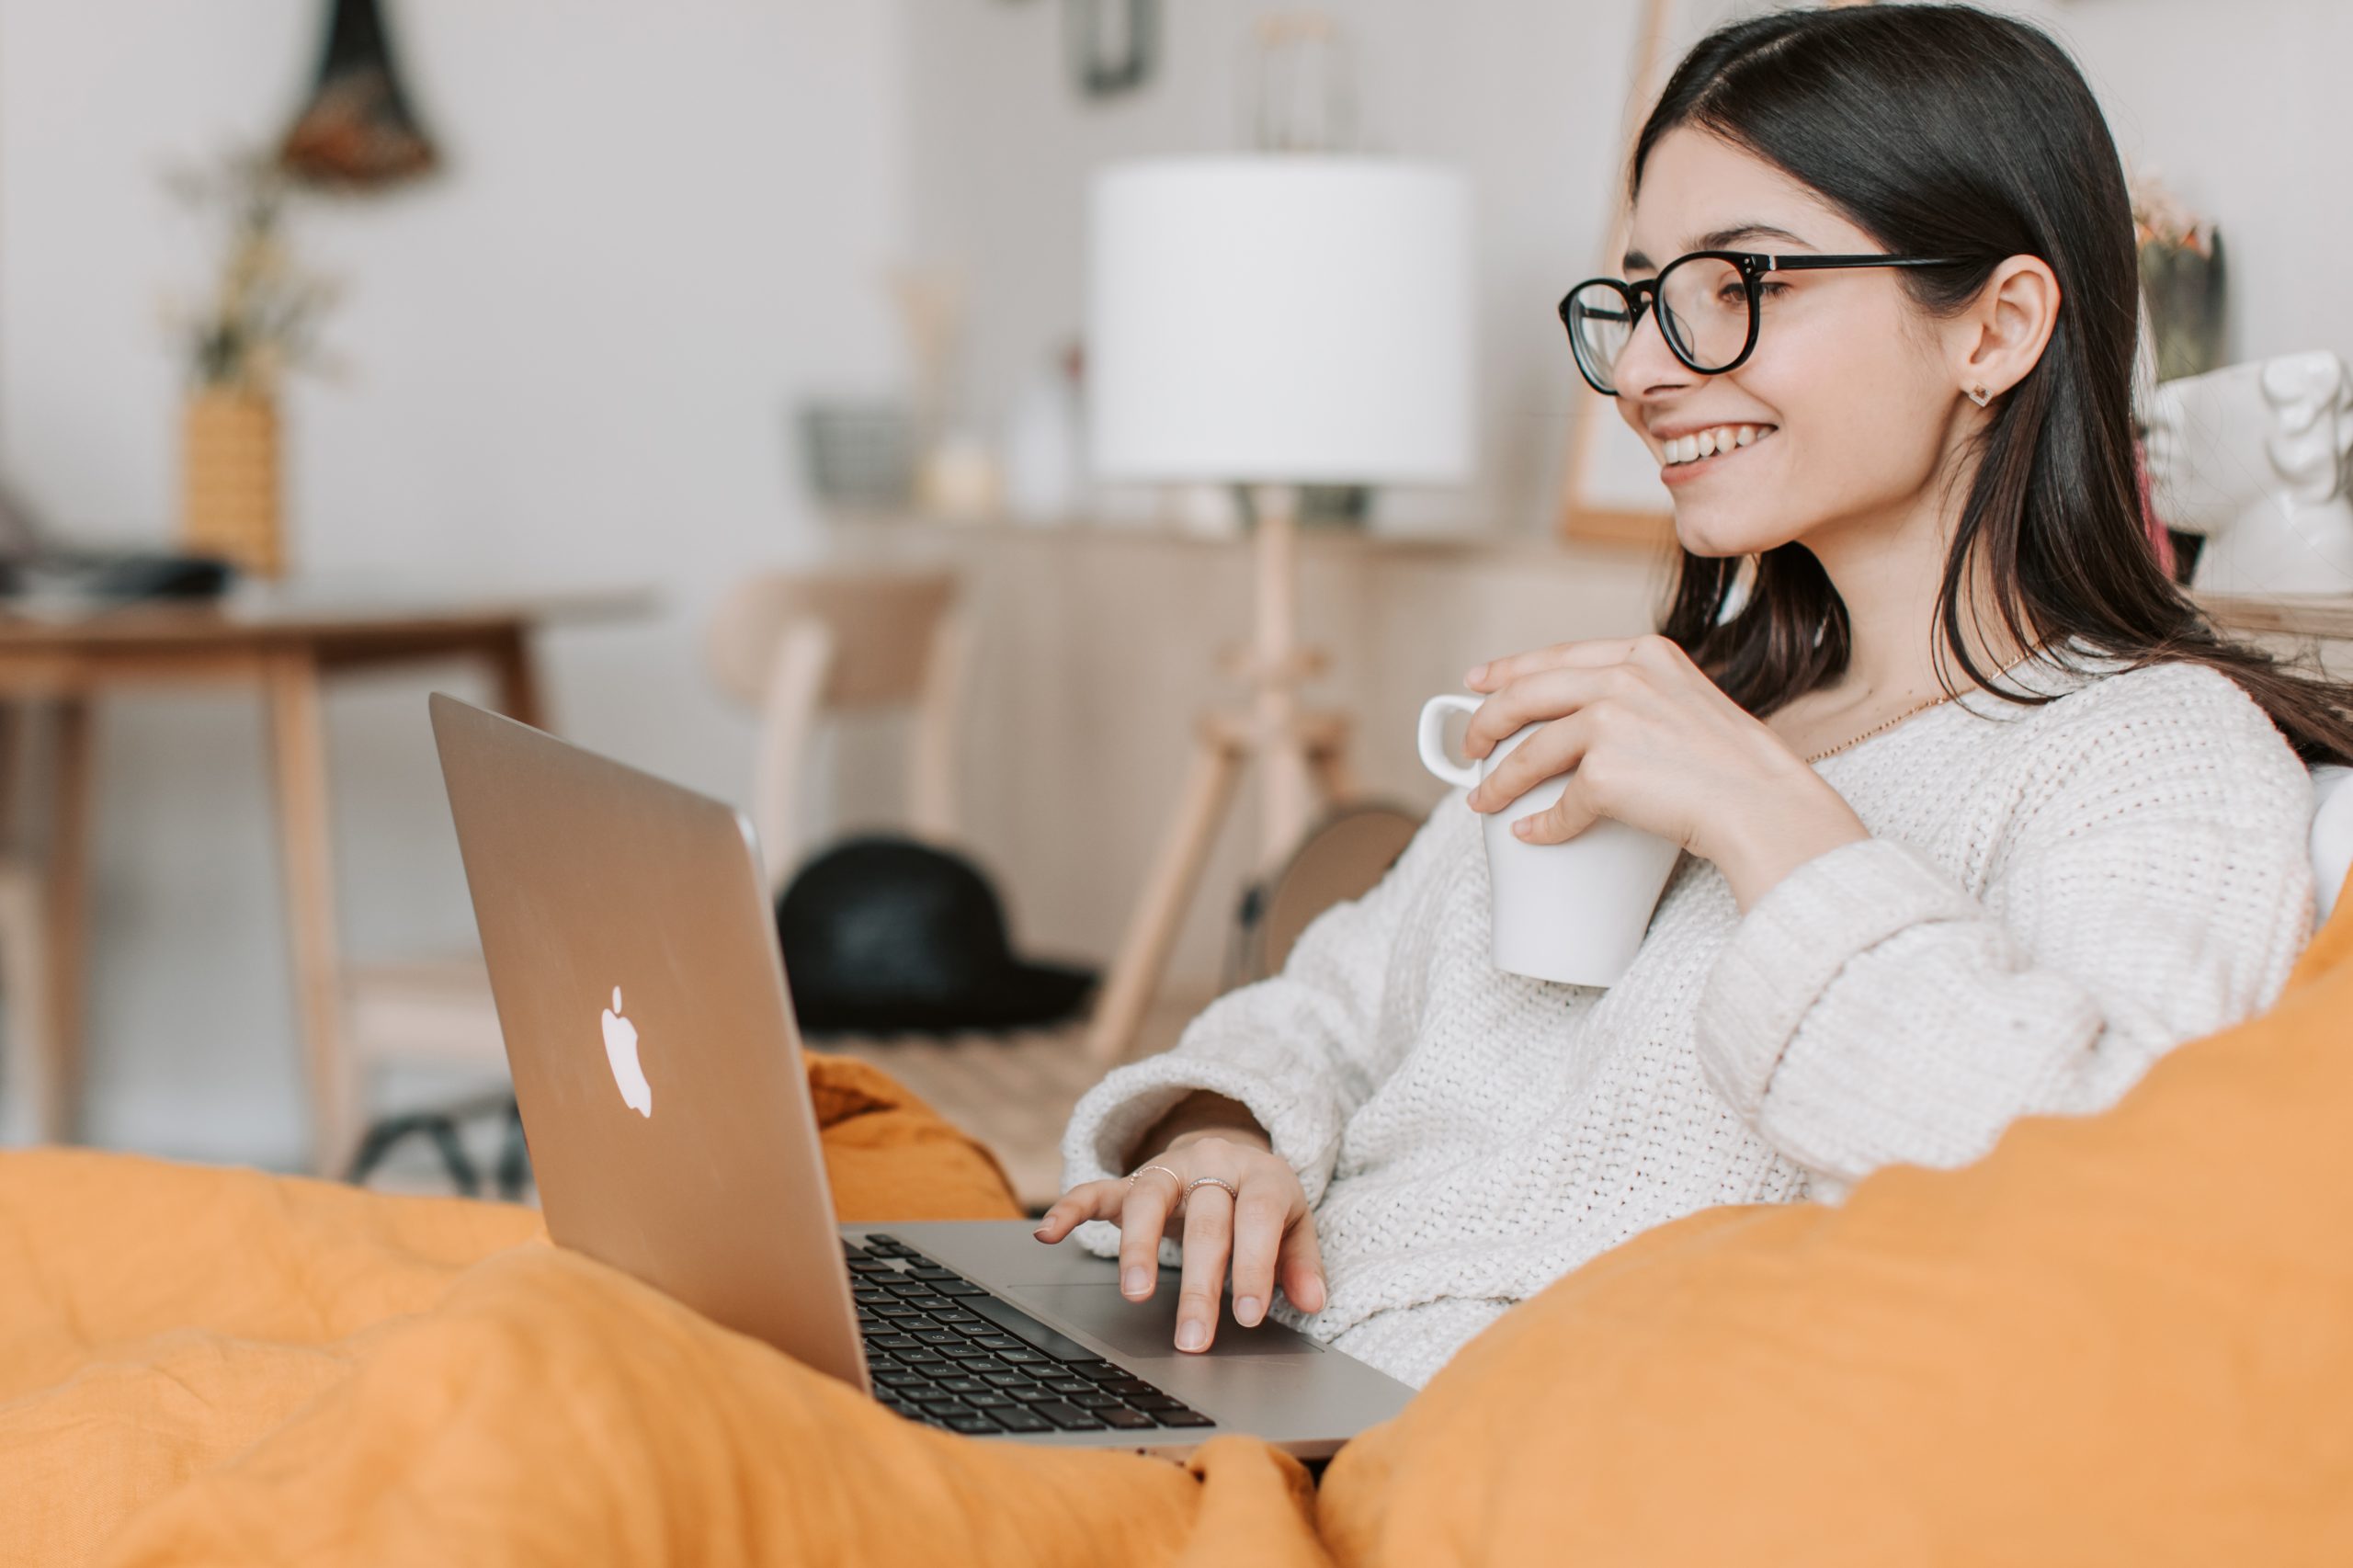 woman smiling and using her laptop holding coffee